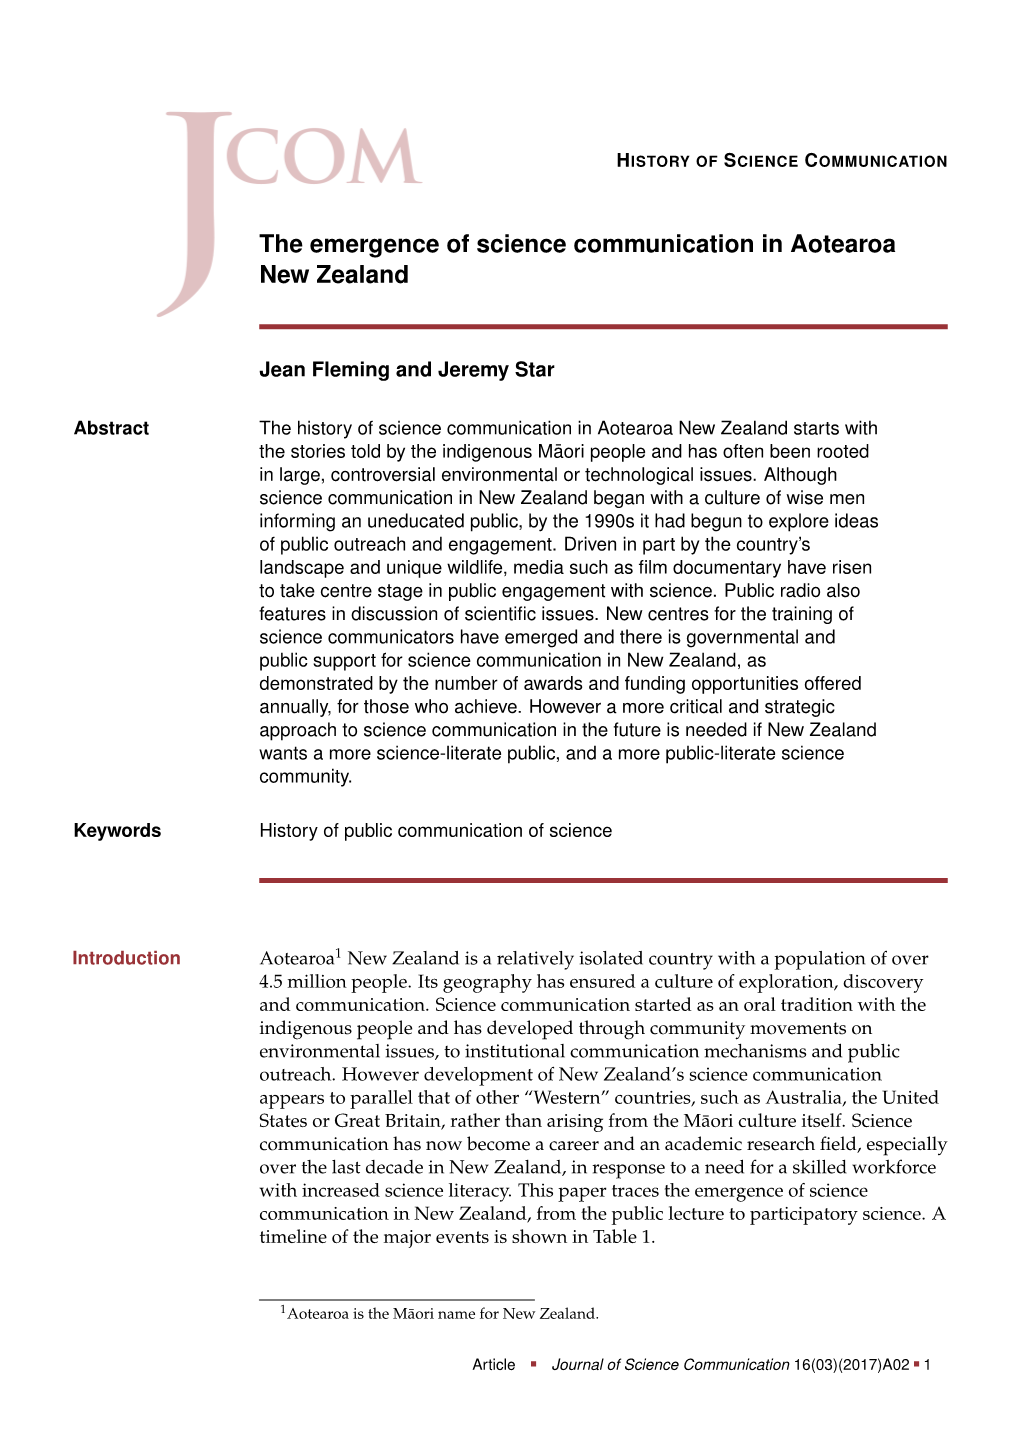 The Emergence of Science Communication in Aotearoa New Zealand